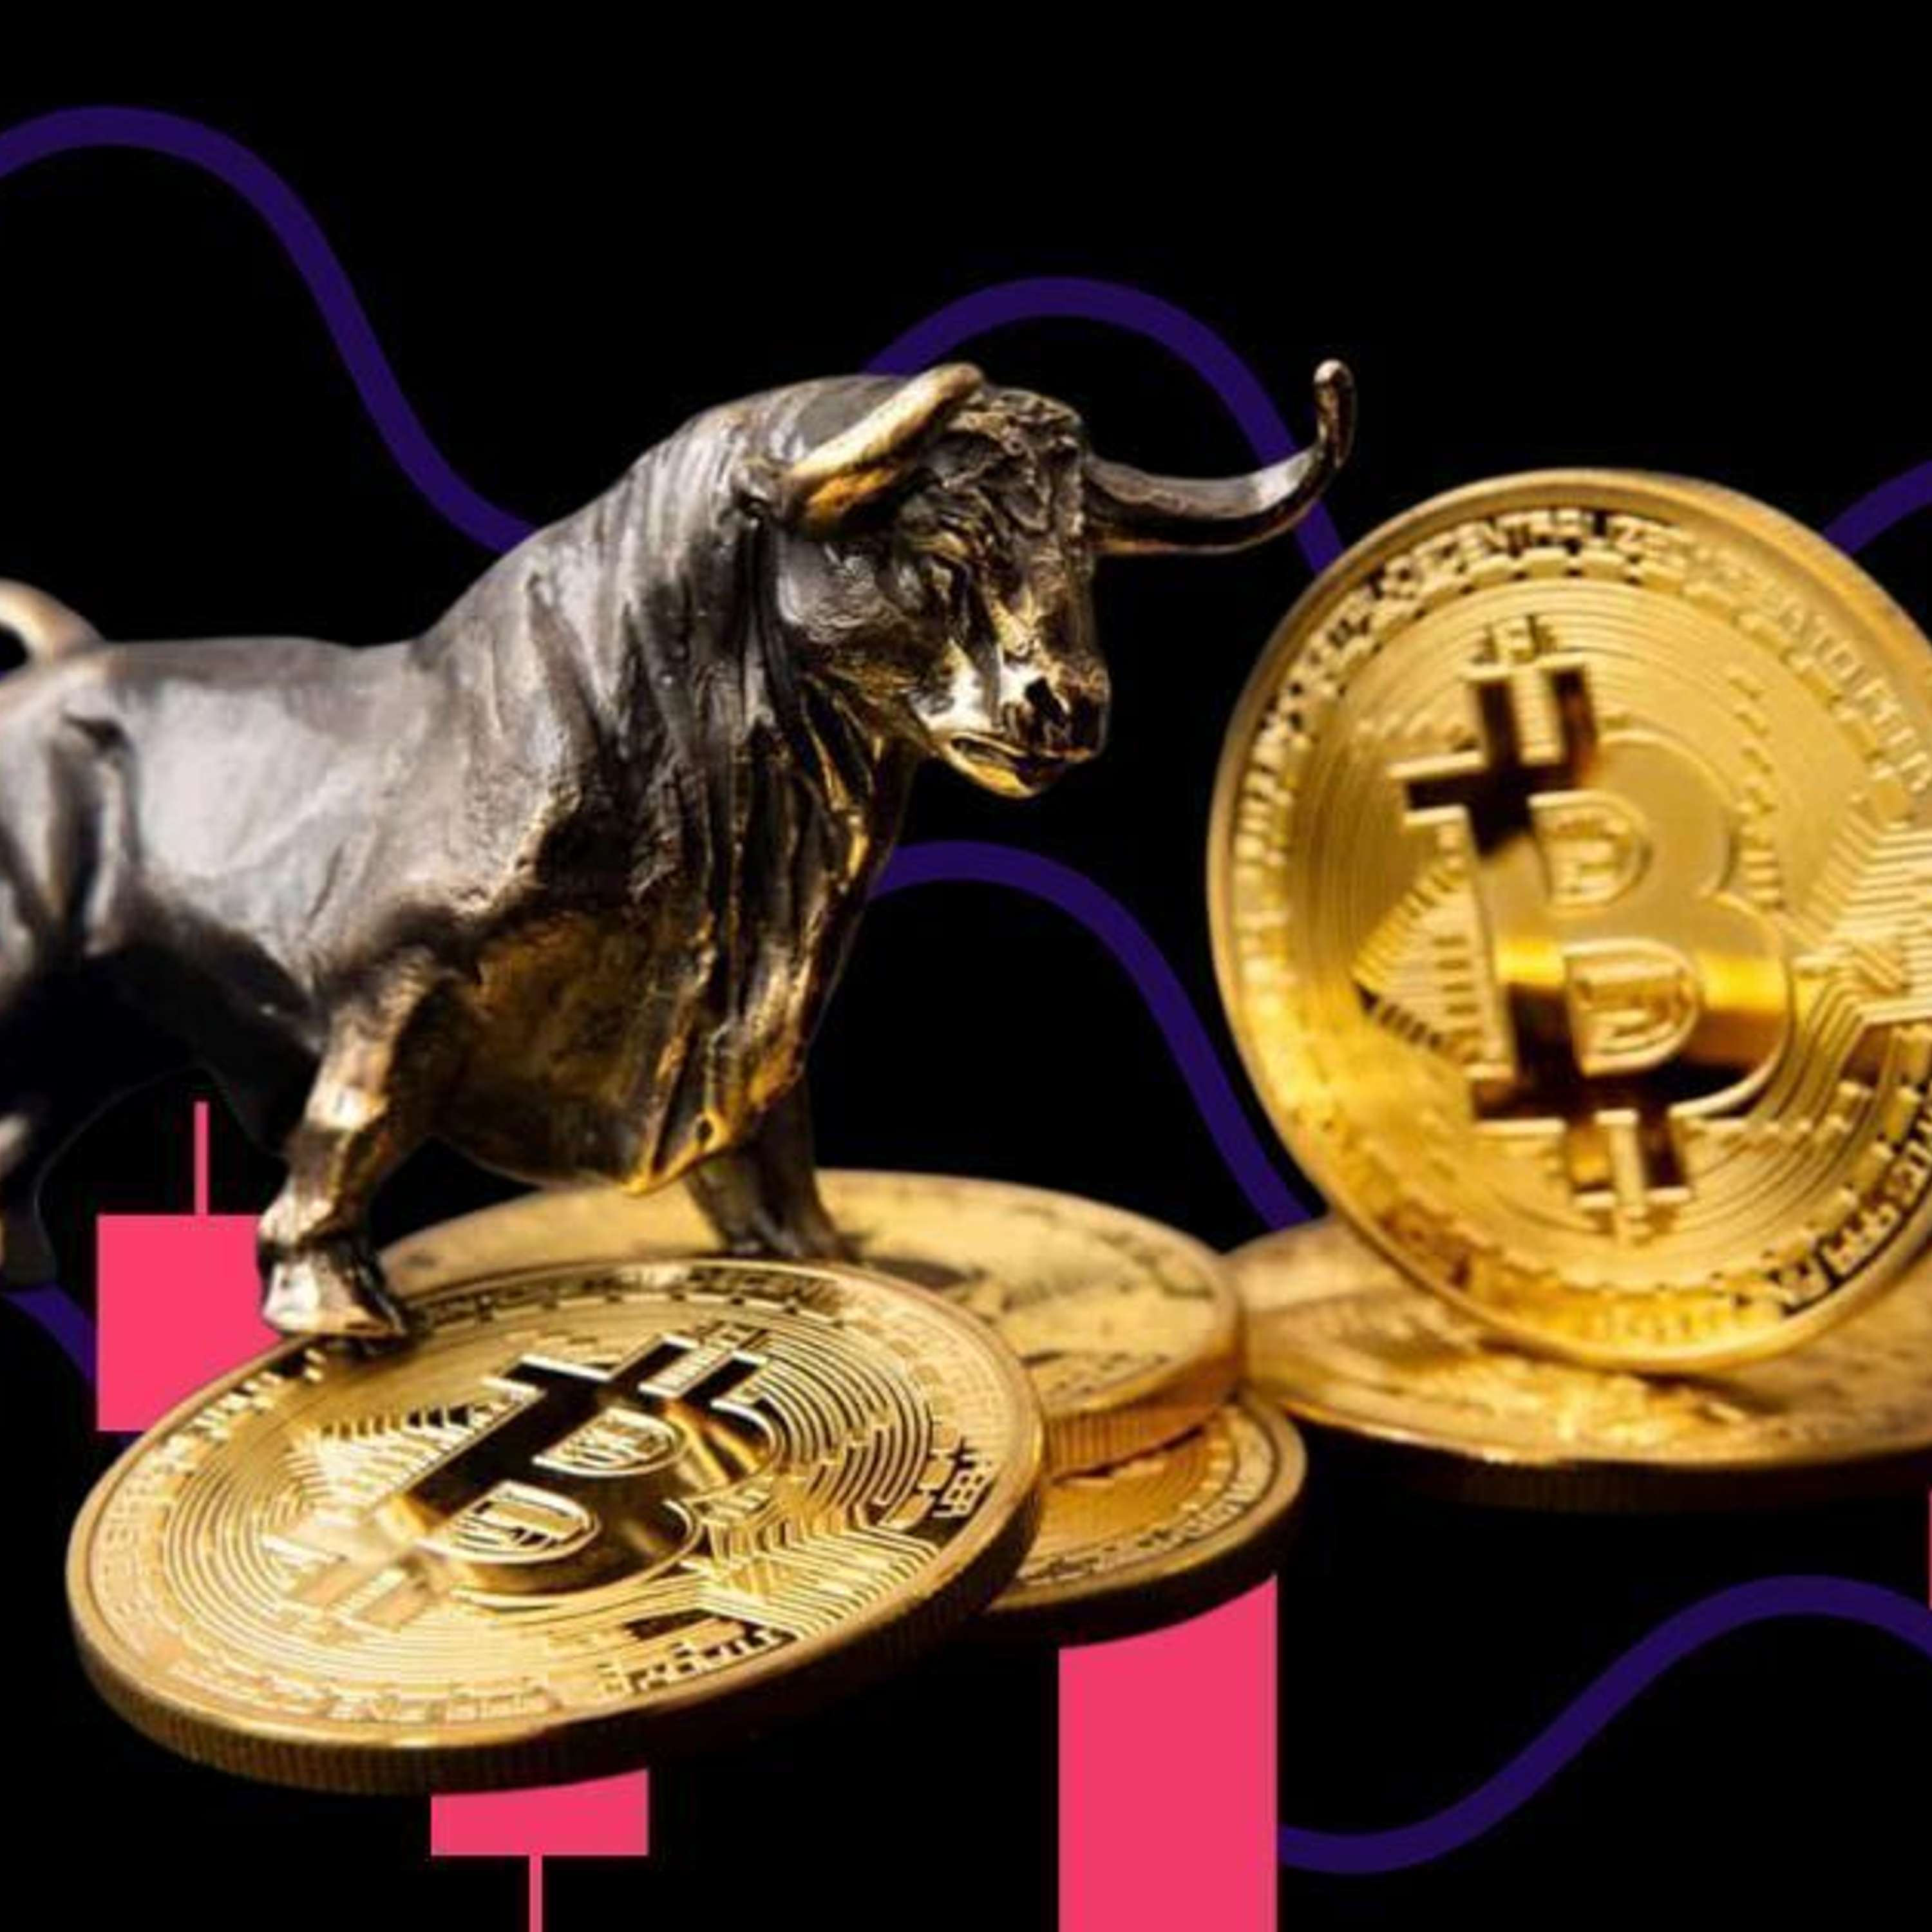 Bitcoin Soars to $50K, GCEX Crossover Join Forces, NZ Central Bank Chief Warns on Stablecoins, New York AG Sues DCG, and more...